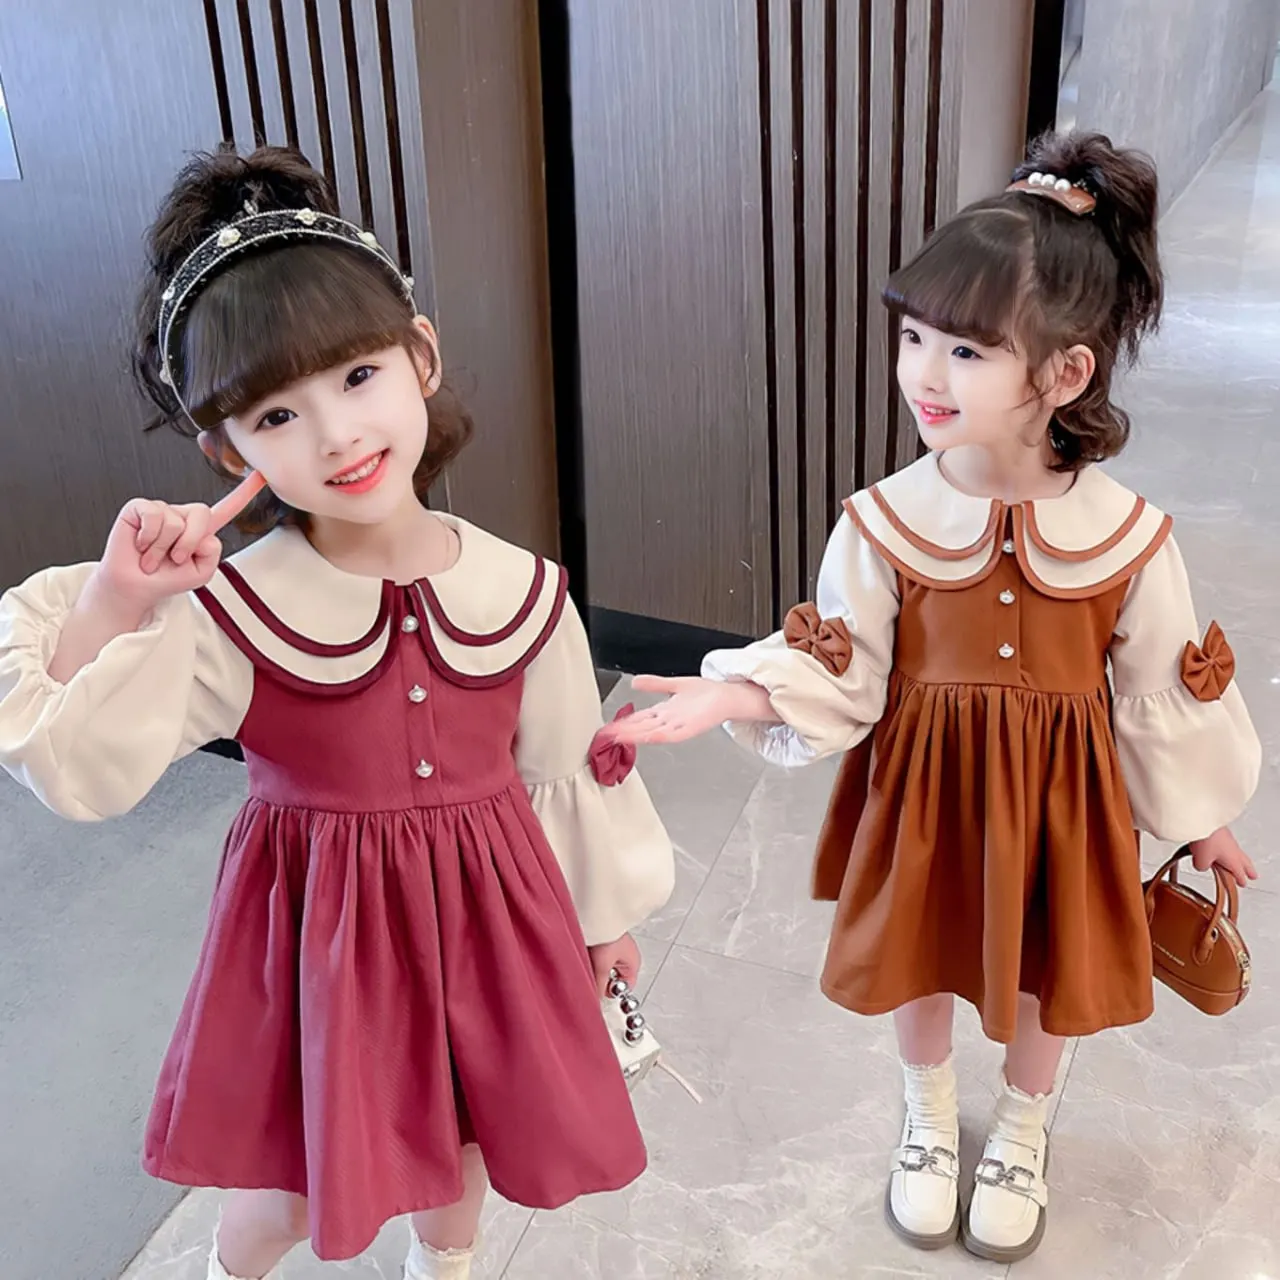 Top Selling Wholesale Kids Dresses For 6-7 Years Kids Clothing Factory Kids Dress For Winter